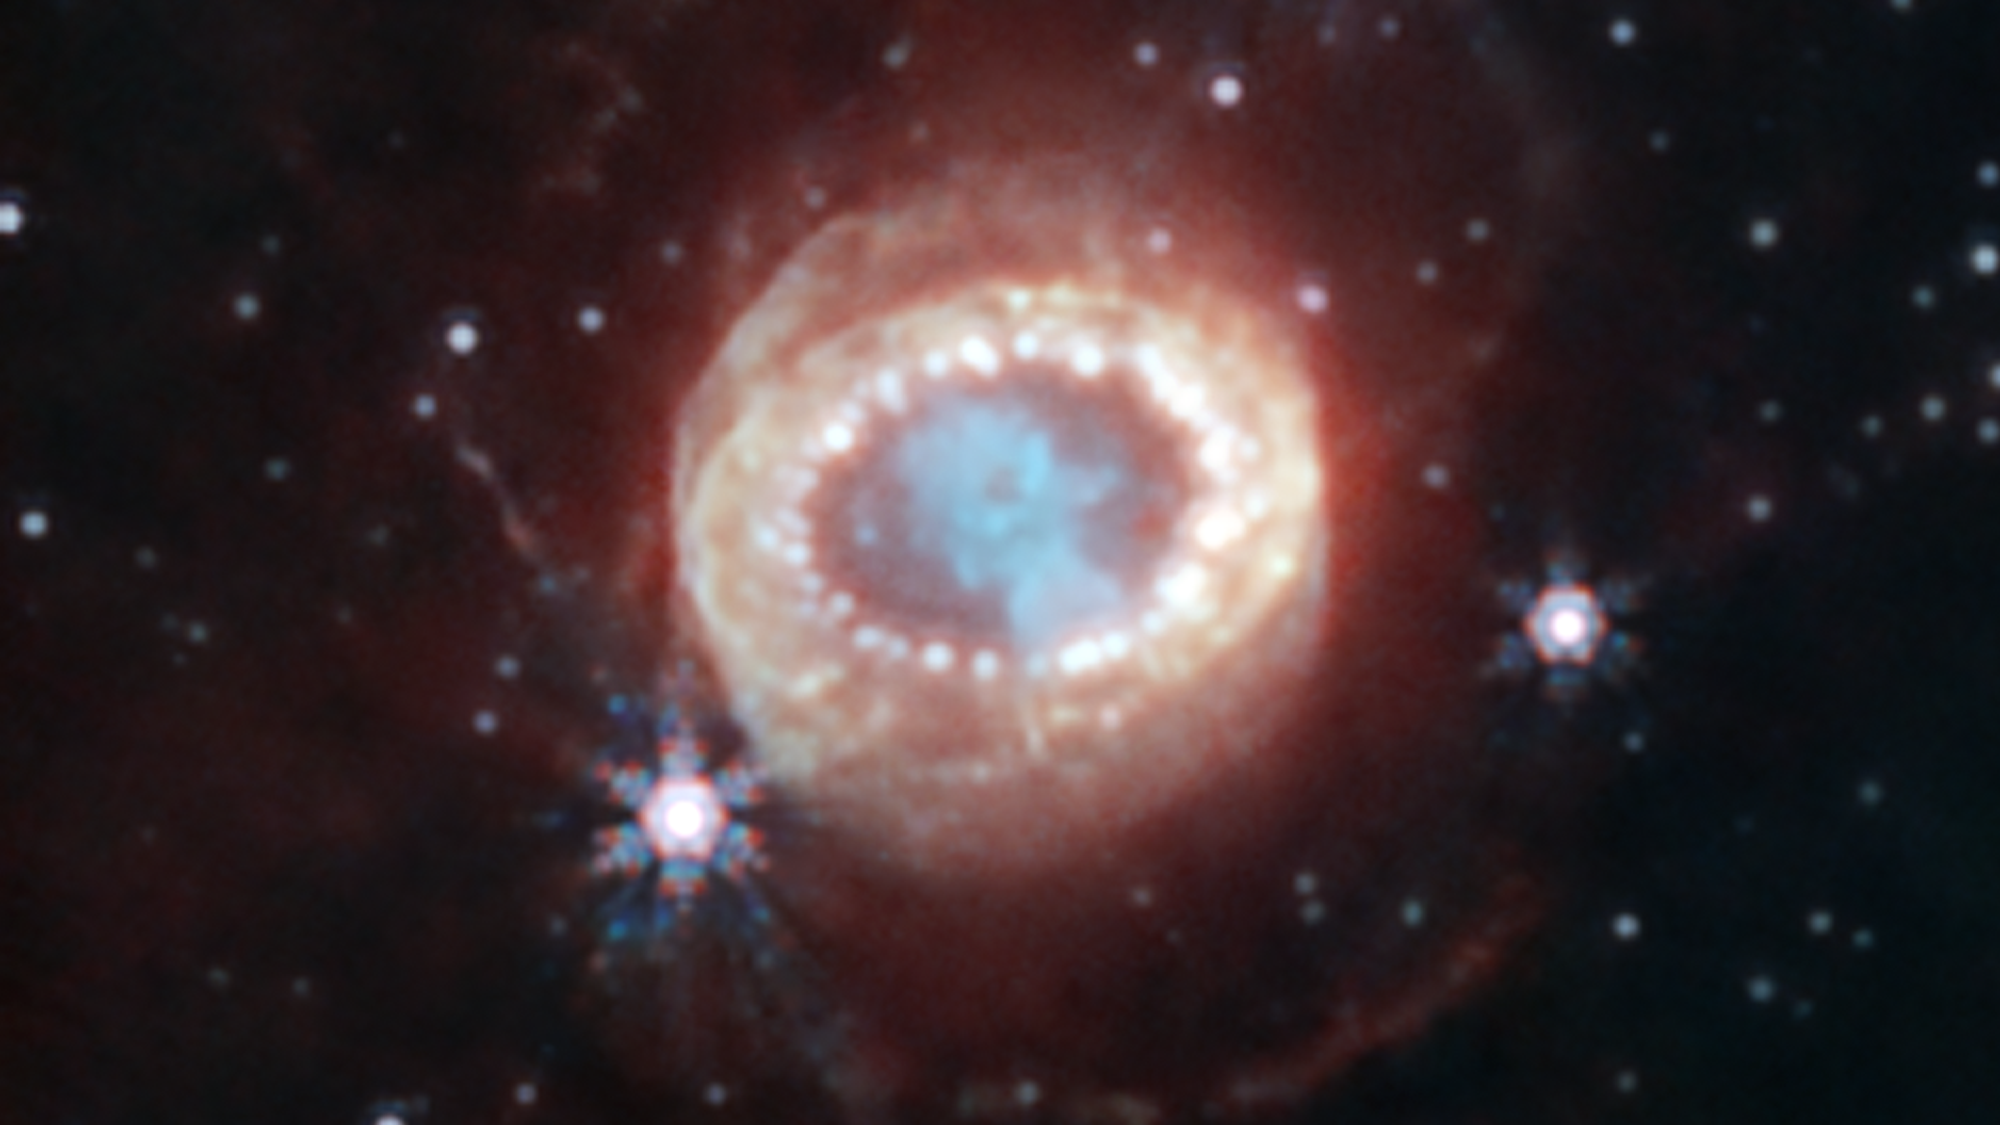 See the stunning Supernova 1987A in a whole new light